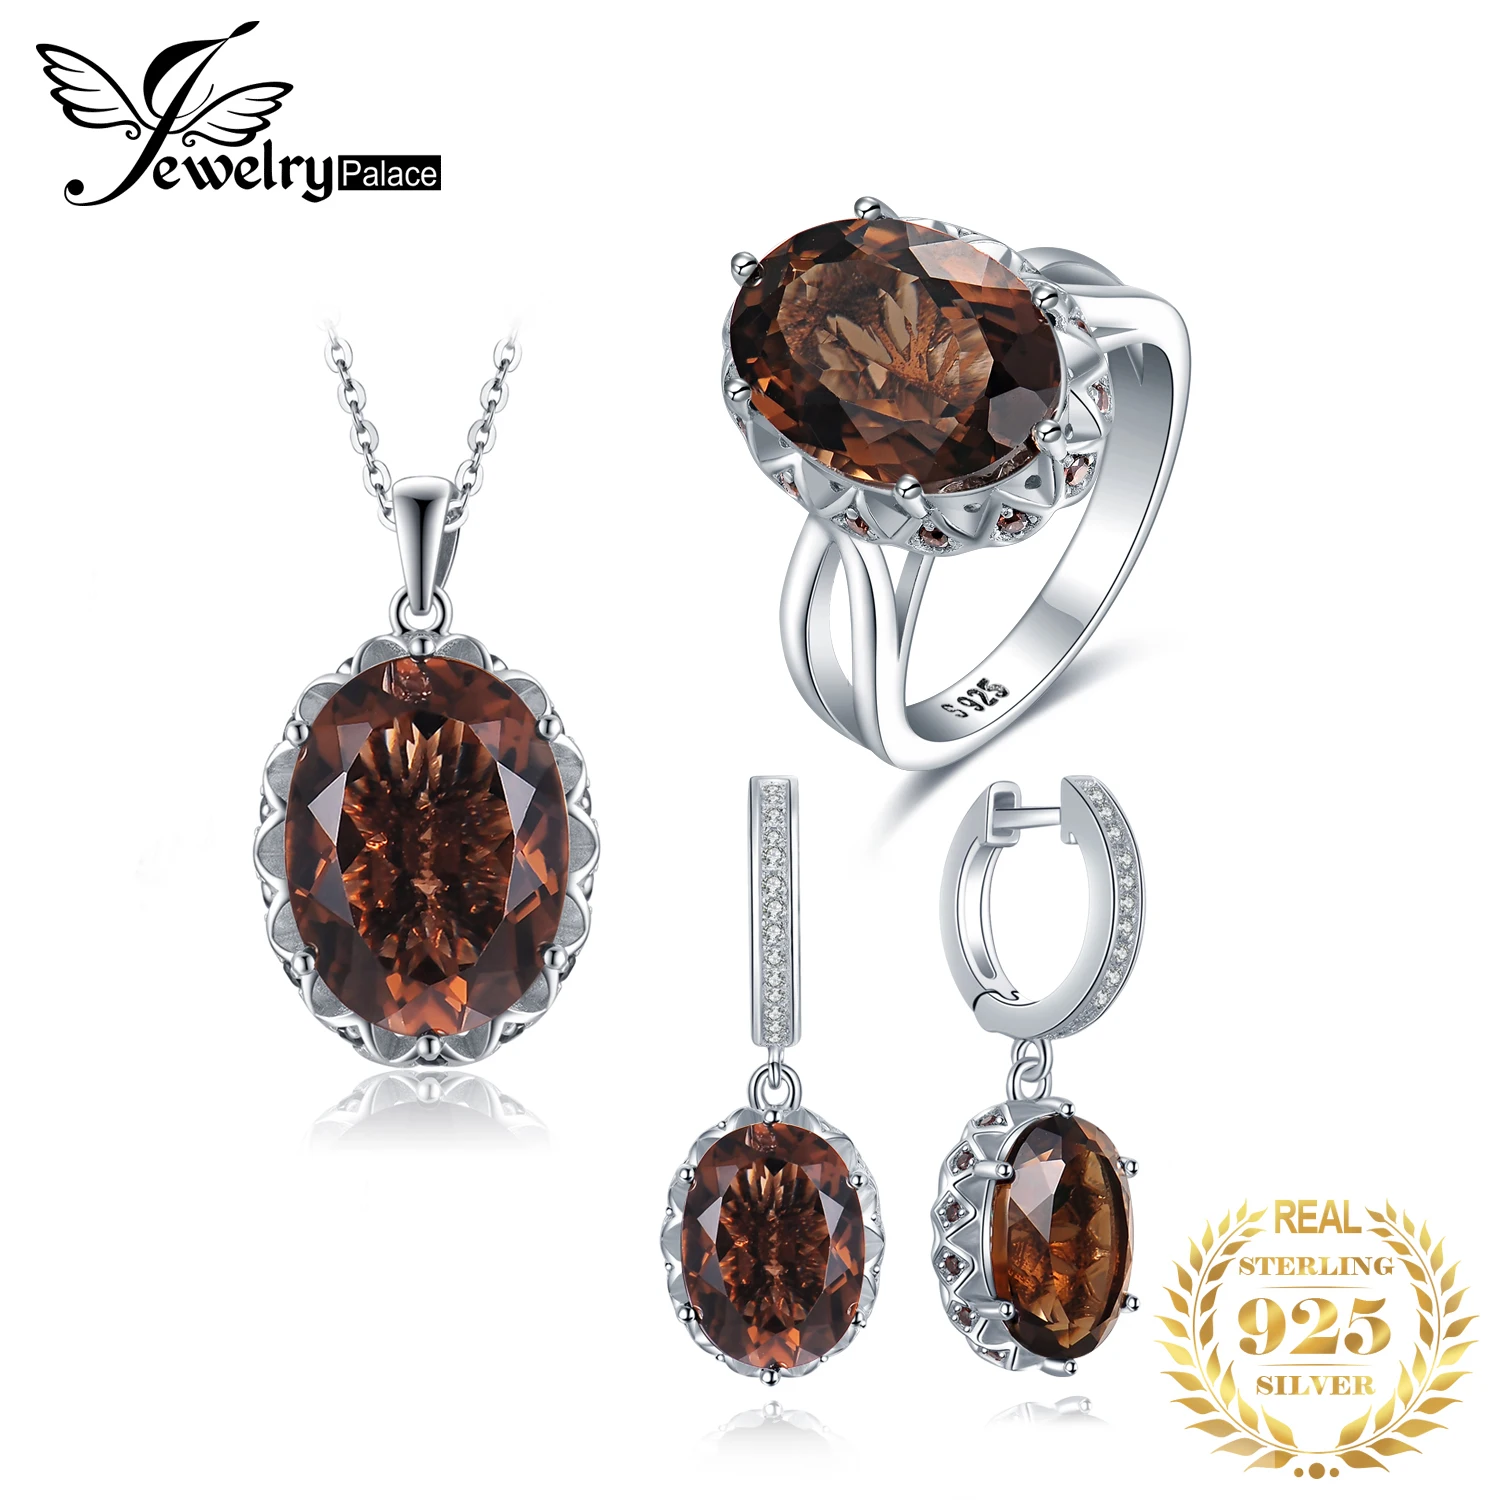 JewelryPalace Large Natural Smoky Quartz 925 Sterling Silver Jewelry Set Pendant Necklace Ring Earrings for Women Gemstone Set